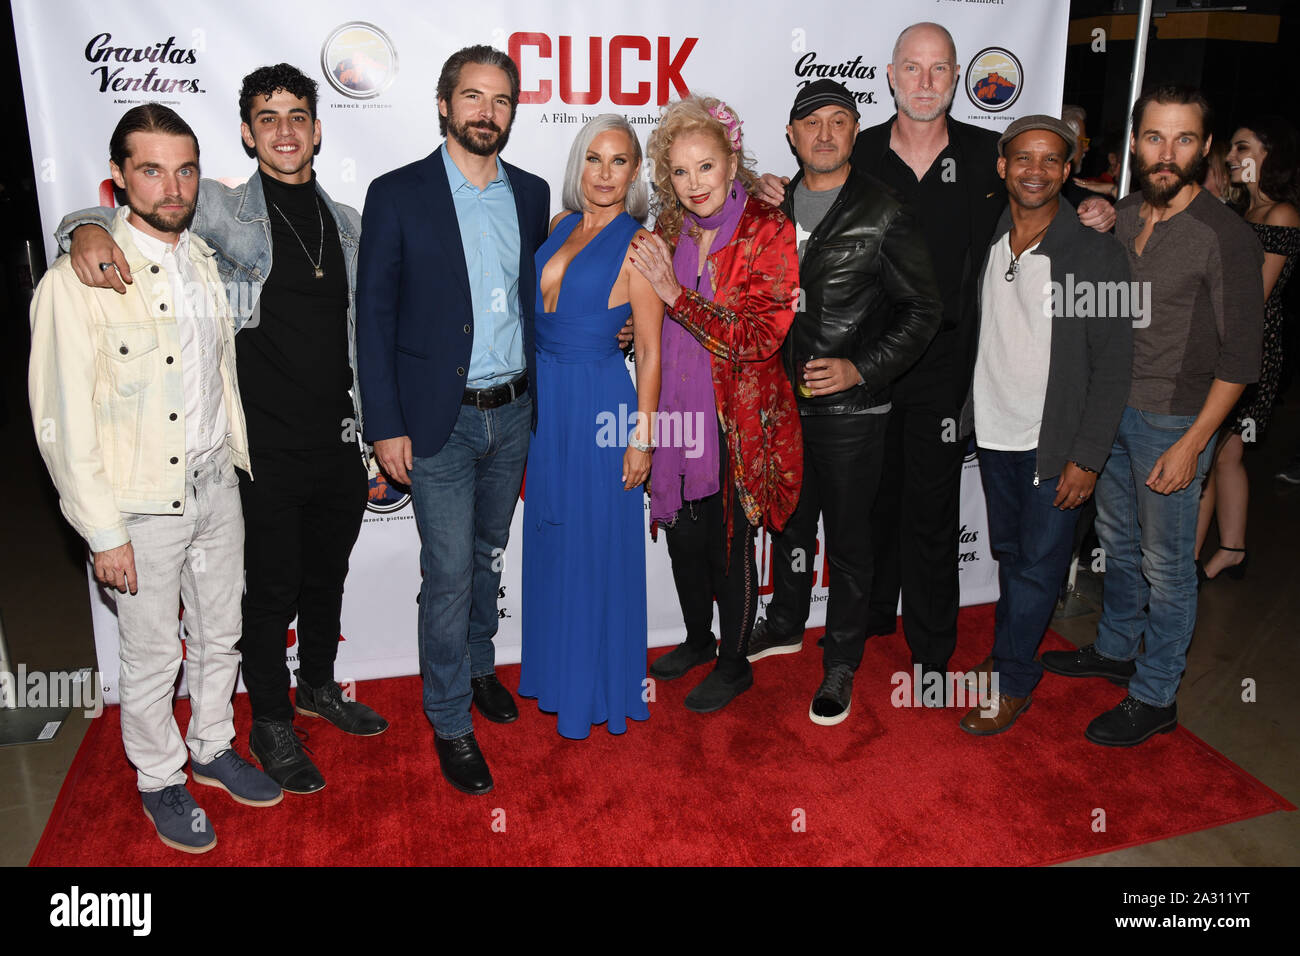 October 3, 2019, Los Angeles, California, USA: 03 October 2019 - Hollywood, California - (L - R) Zachary Ray Sherman, Adam Elshar, Rob Lambert, Monique Parent, Sally Kirkland, Timothy B. Murphy, Hugo Armstrong, Patrick Y. Malone, Travis Hammer. ''CUCK'' Los Angeles Premiere held at TCL Chinese Theater. Photo Credit: Billy Bennight/AdMedia (Credit Image: © Billy Bennight/AdMedia via ZUMA Wire) Stock Photo